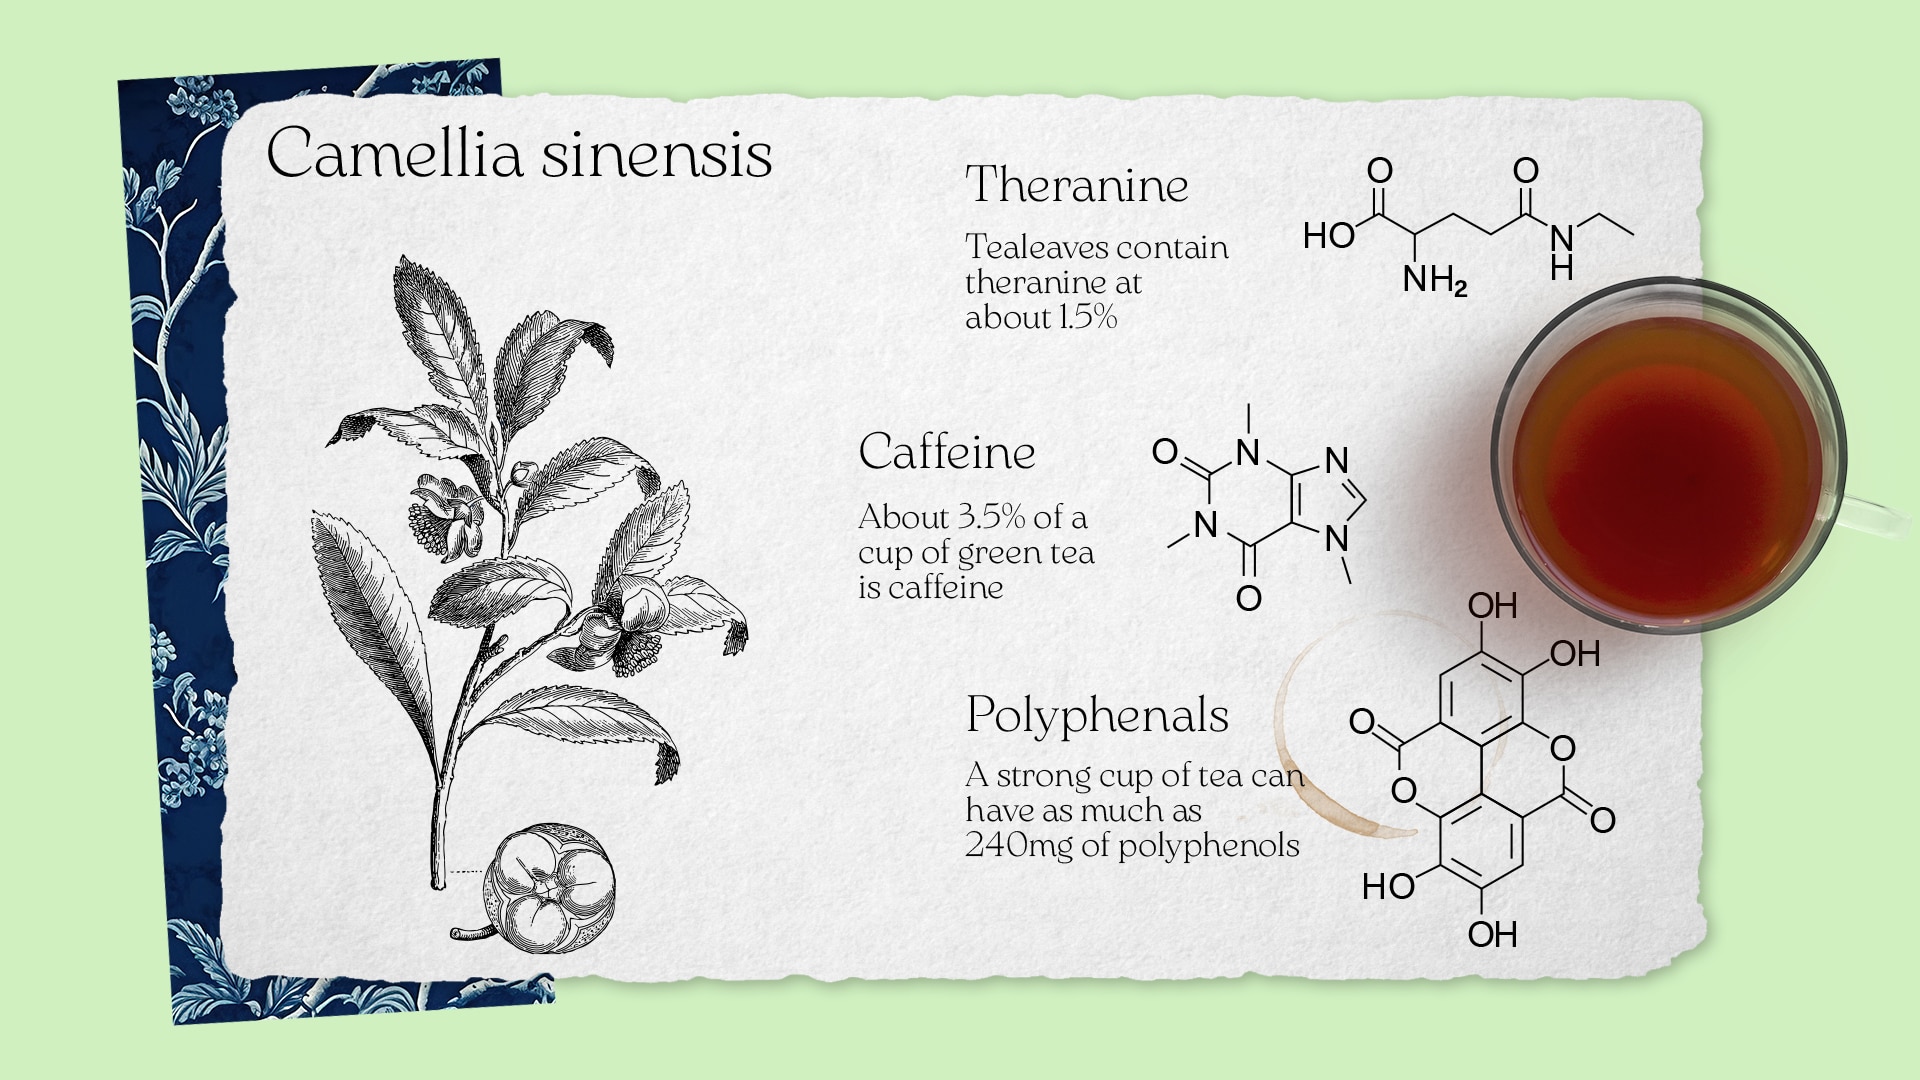 A drawing of camellia sinensis, the official name of the tea plant.